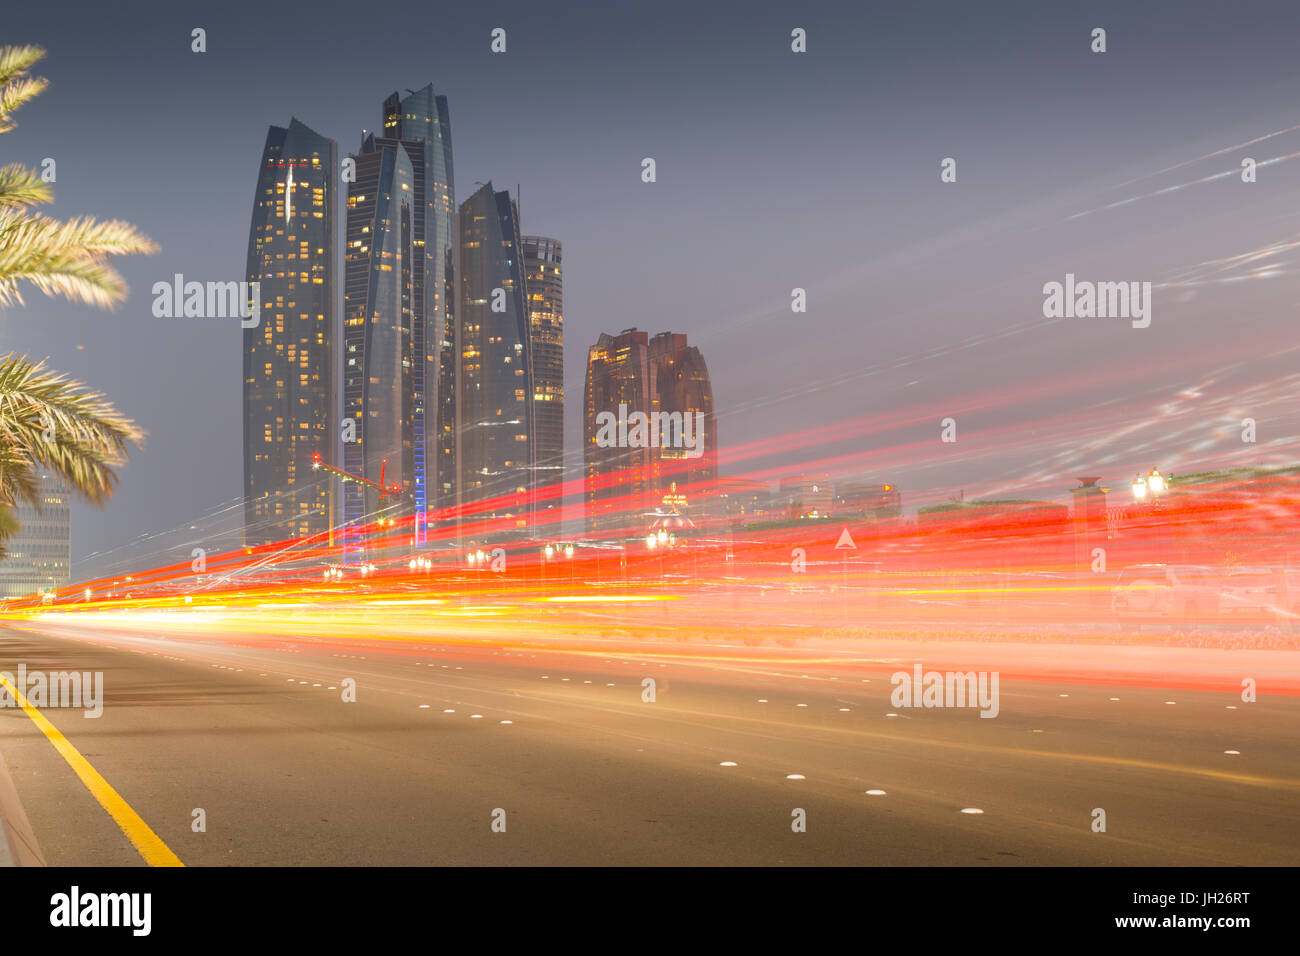 View of Ethiad Towers and Corniche at dusk, Abu Dhabi, United Arab Emirates, Middle East Stock Photo